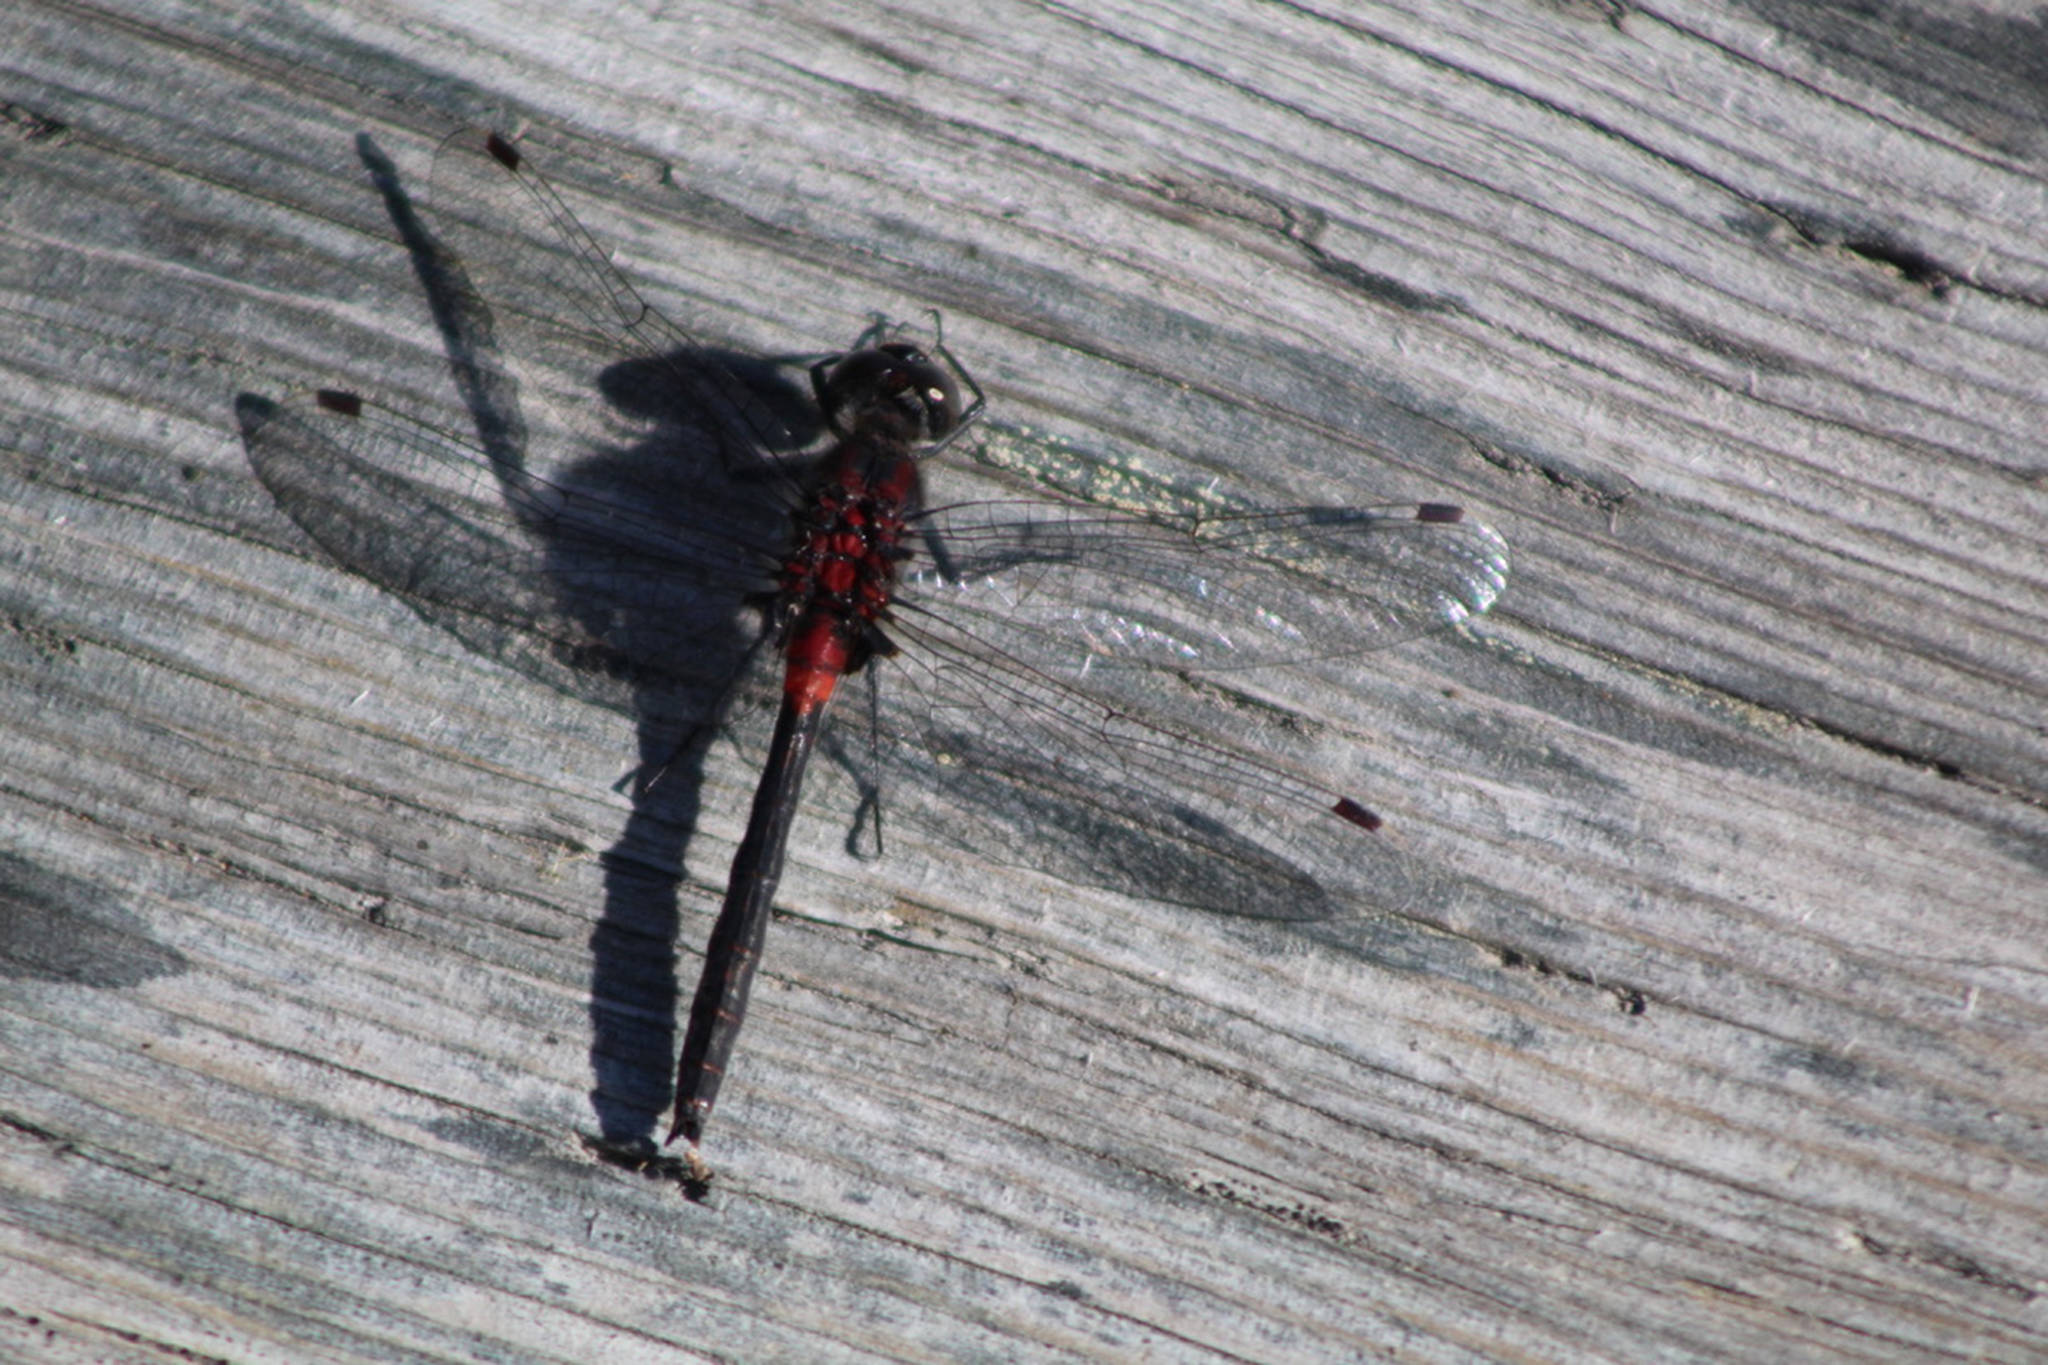 This dragonfly at the Kenai Wildlife Refuge in the last week of July 2020. (Courtesy Photo / Carolyn Kelley)